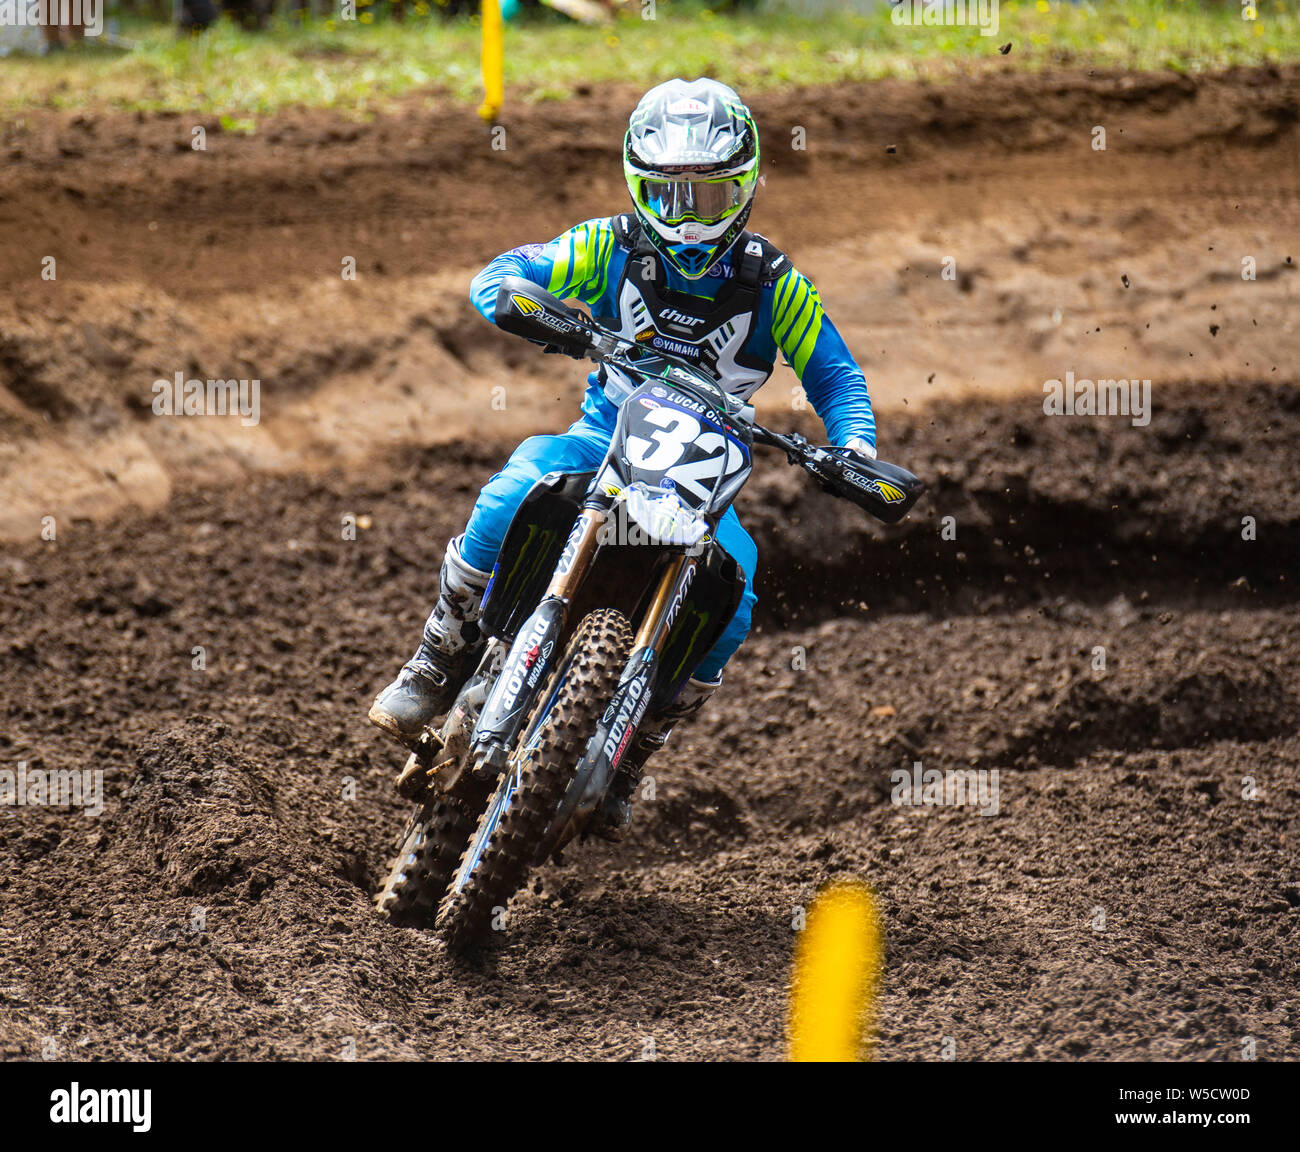 Washougal, USA. 27th July, 2019. # 32 Justin Cooper coming out of turn 31during the Lucas Oil Pro Motocross Washougal Championship 250 class moto # 1 at Washougal MX park Washougal, WA Thurman James/CSM/Alamy Live News Stock Photo